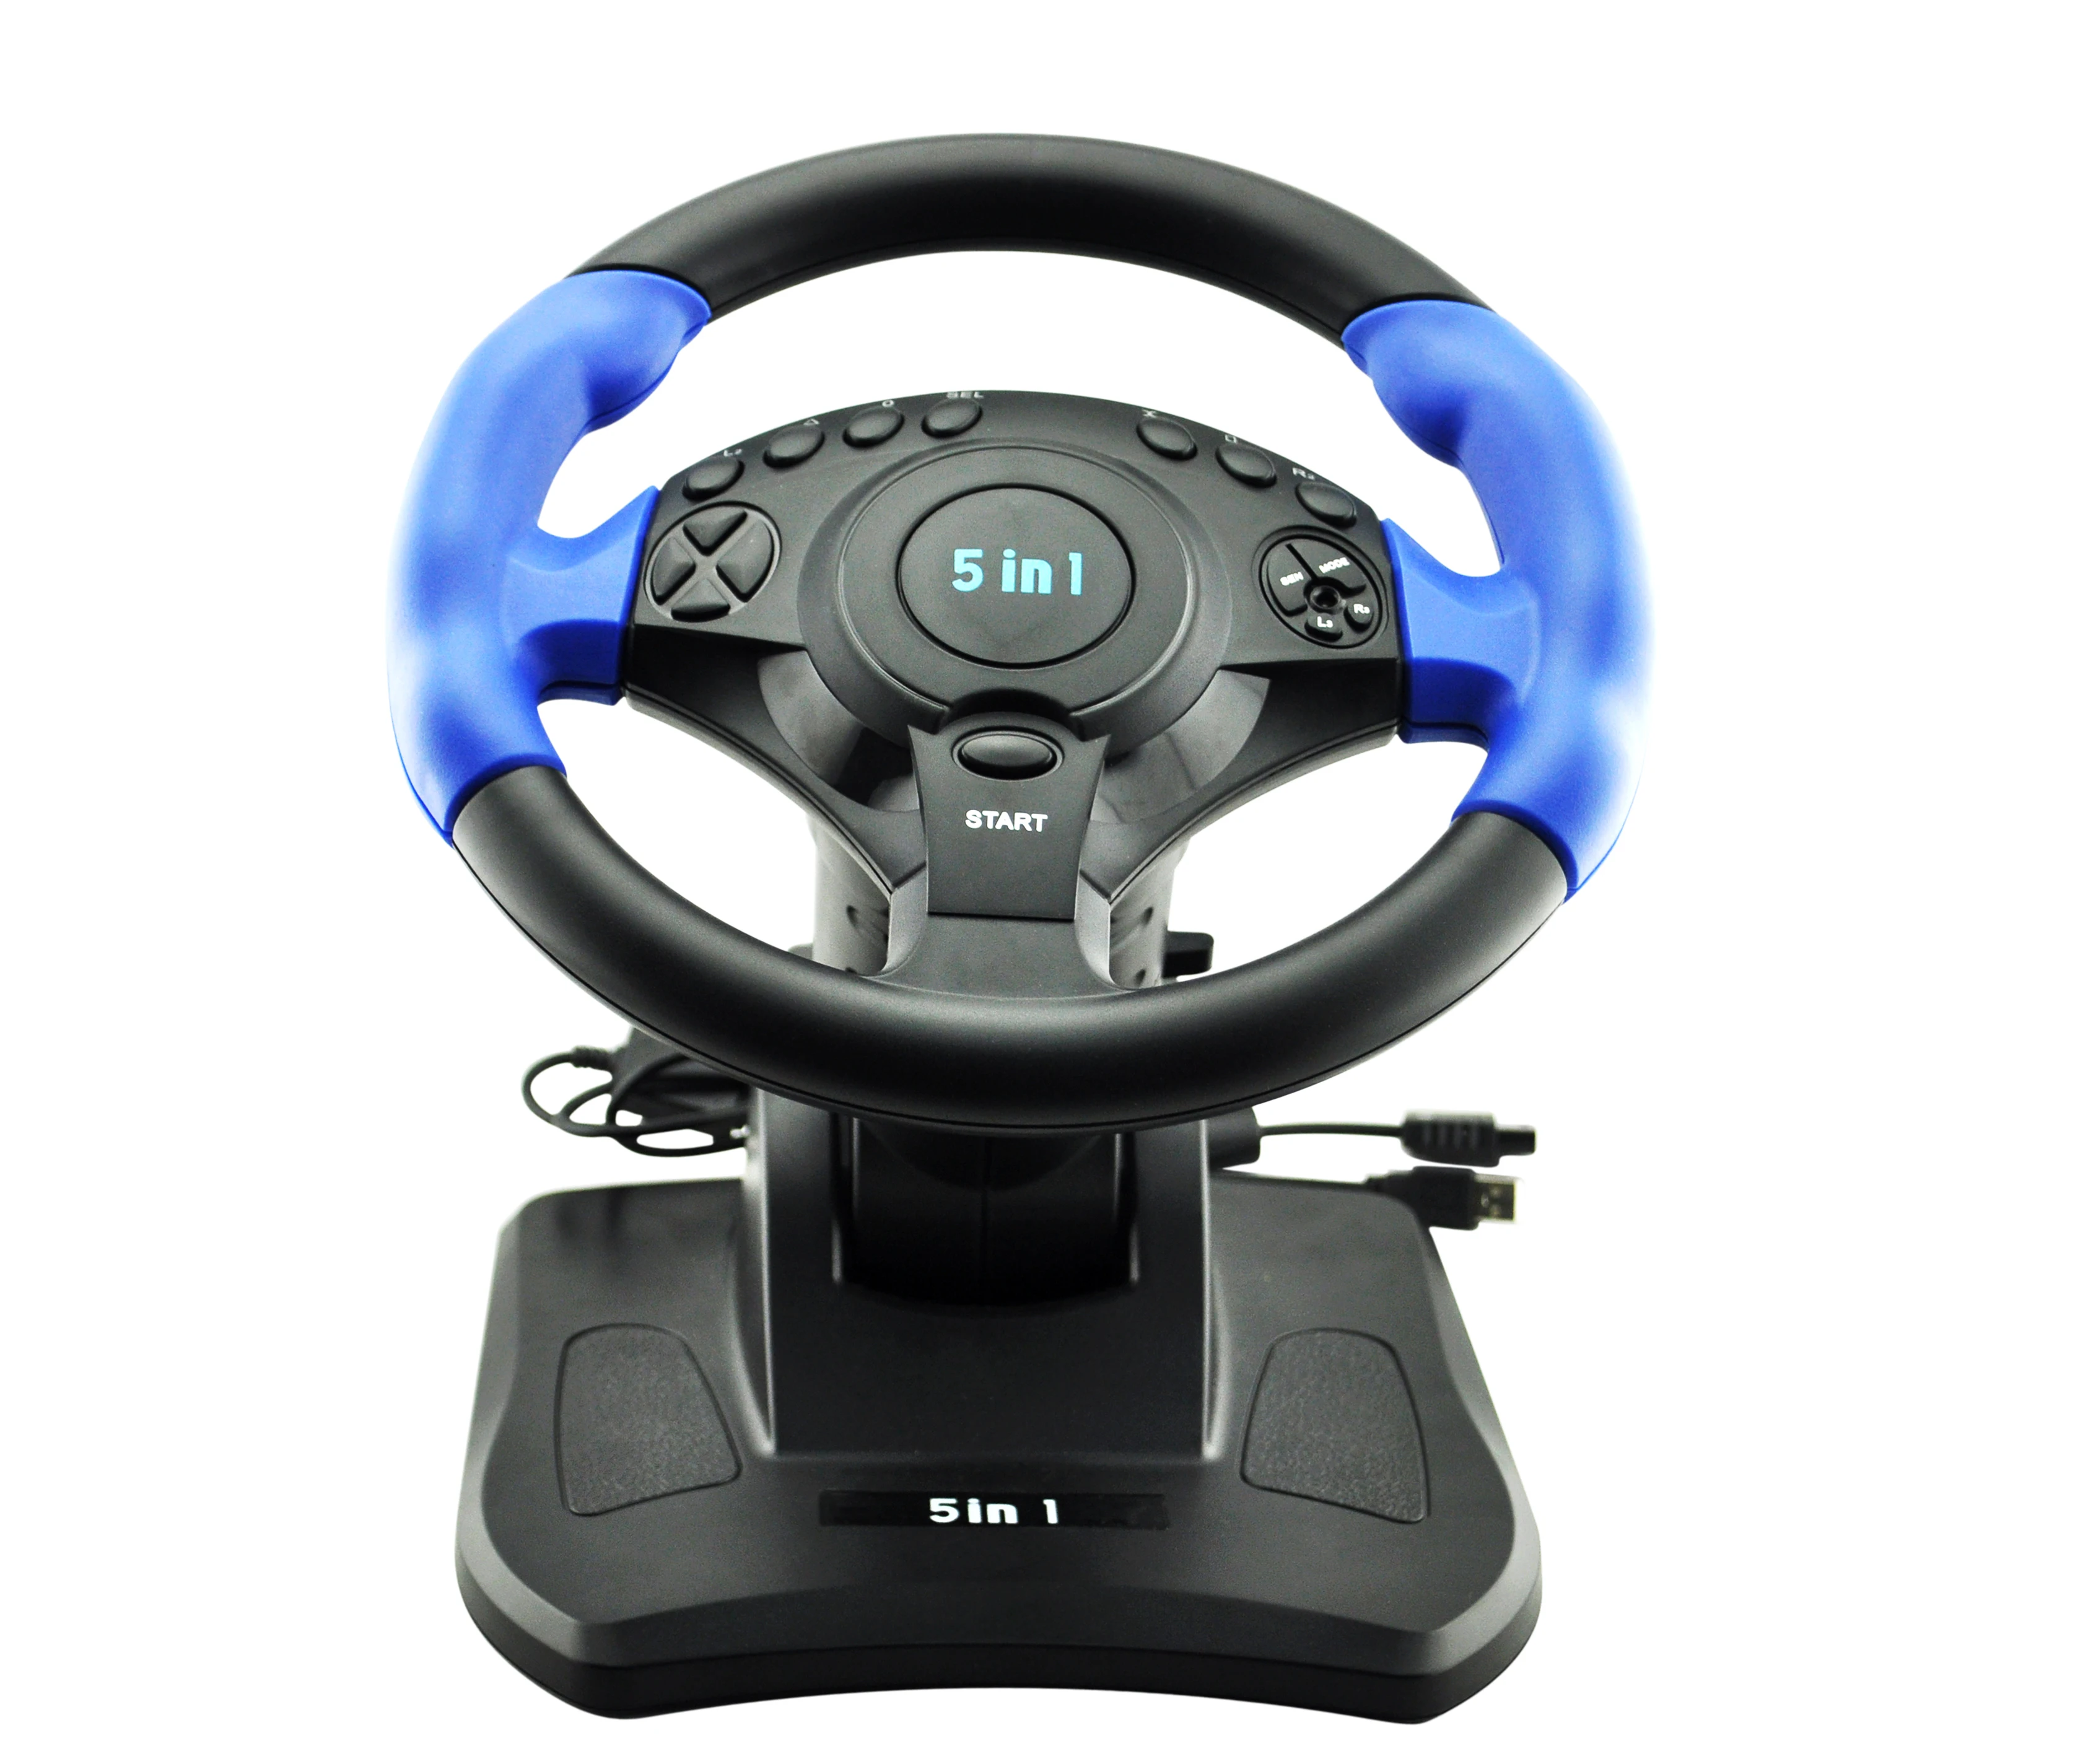 
C-Star Qeome NS9837 wholesale 180-degree steering angle game steering wheel Interactive vibration with game for For PS2/PS3/USB 